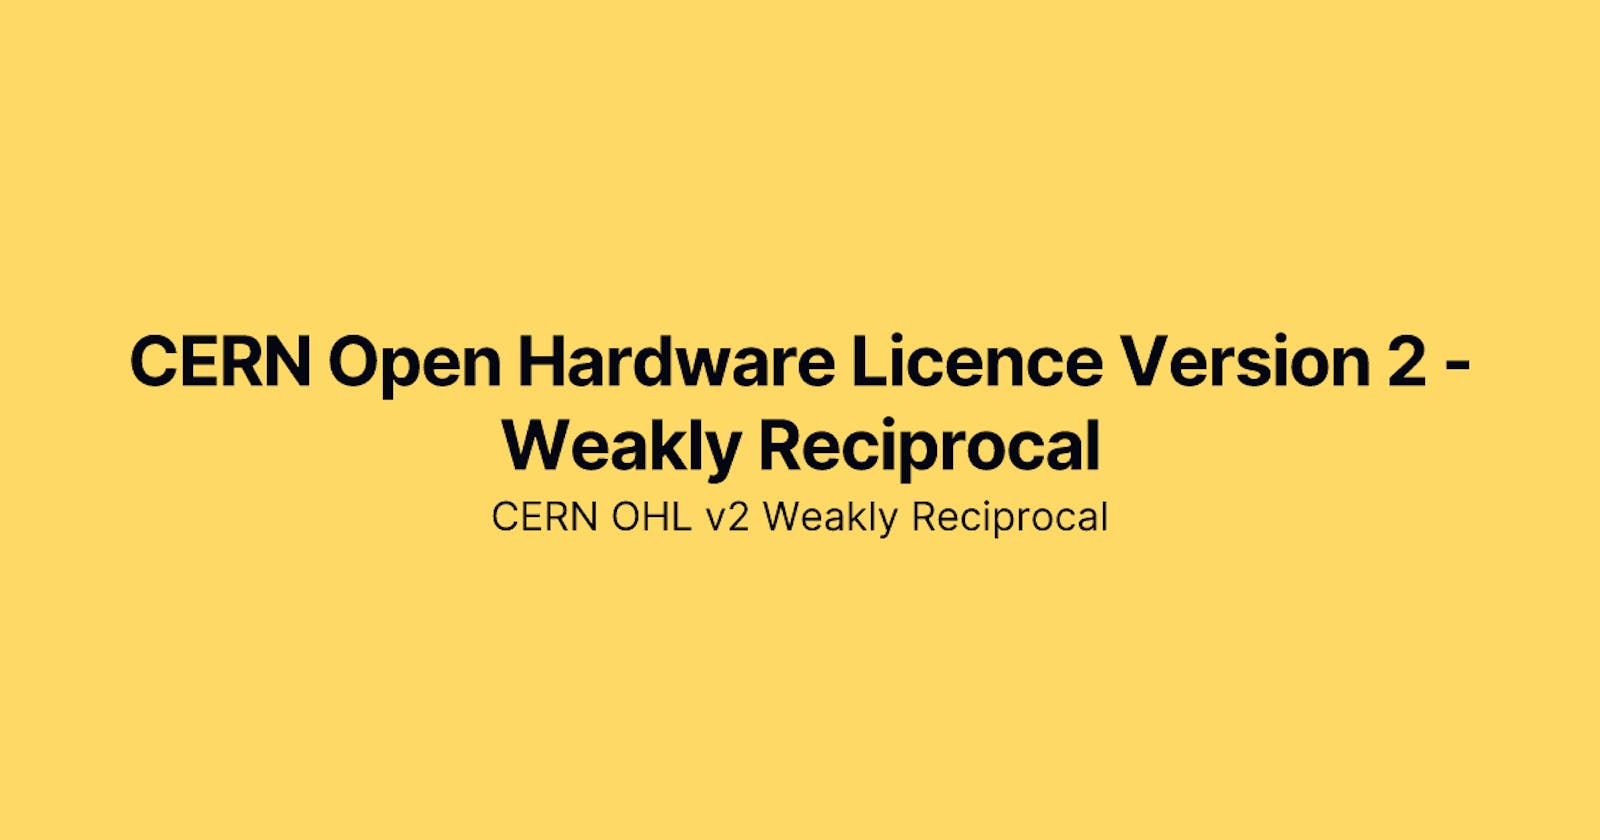 CERN Open Hardware Licence Version 2 - Weakly Reciprocal